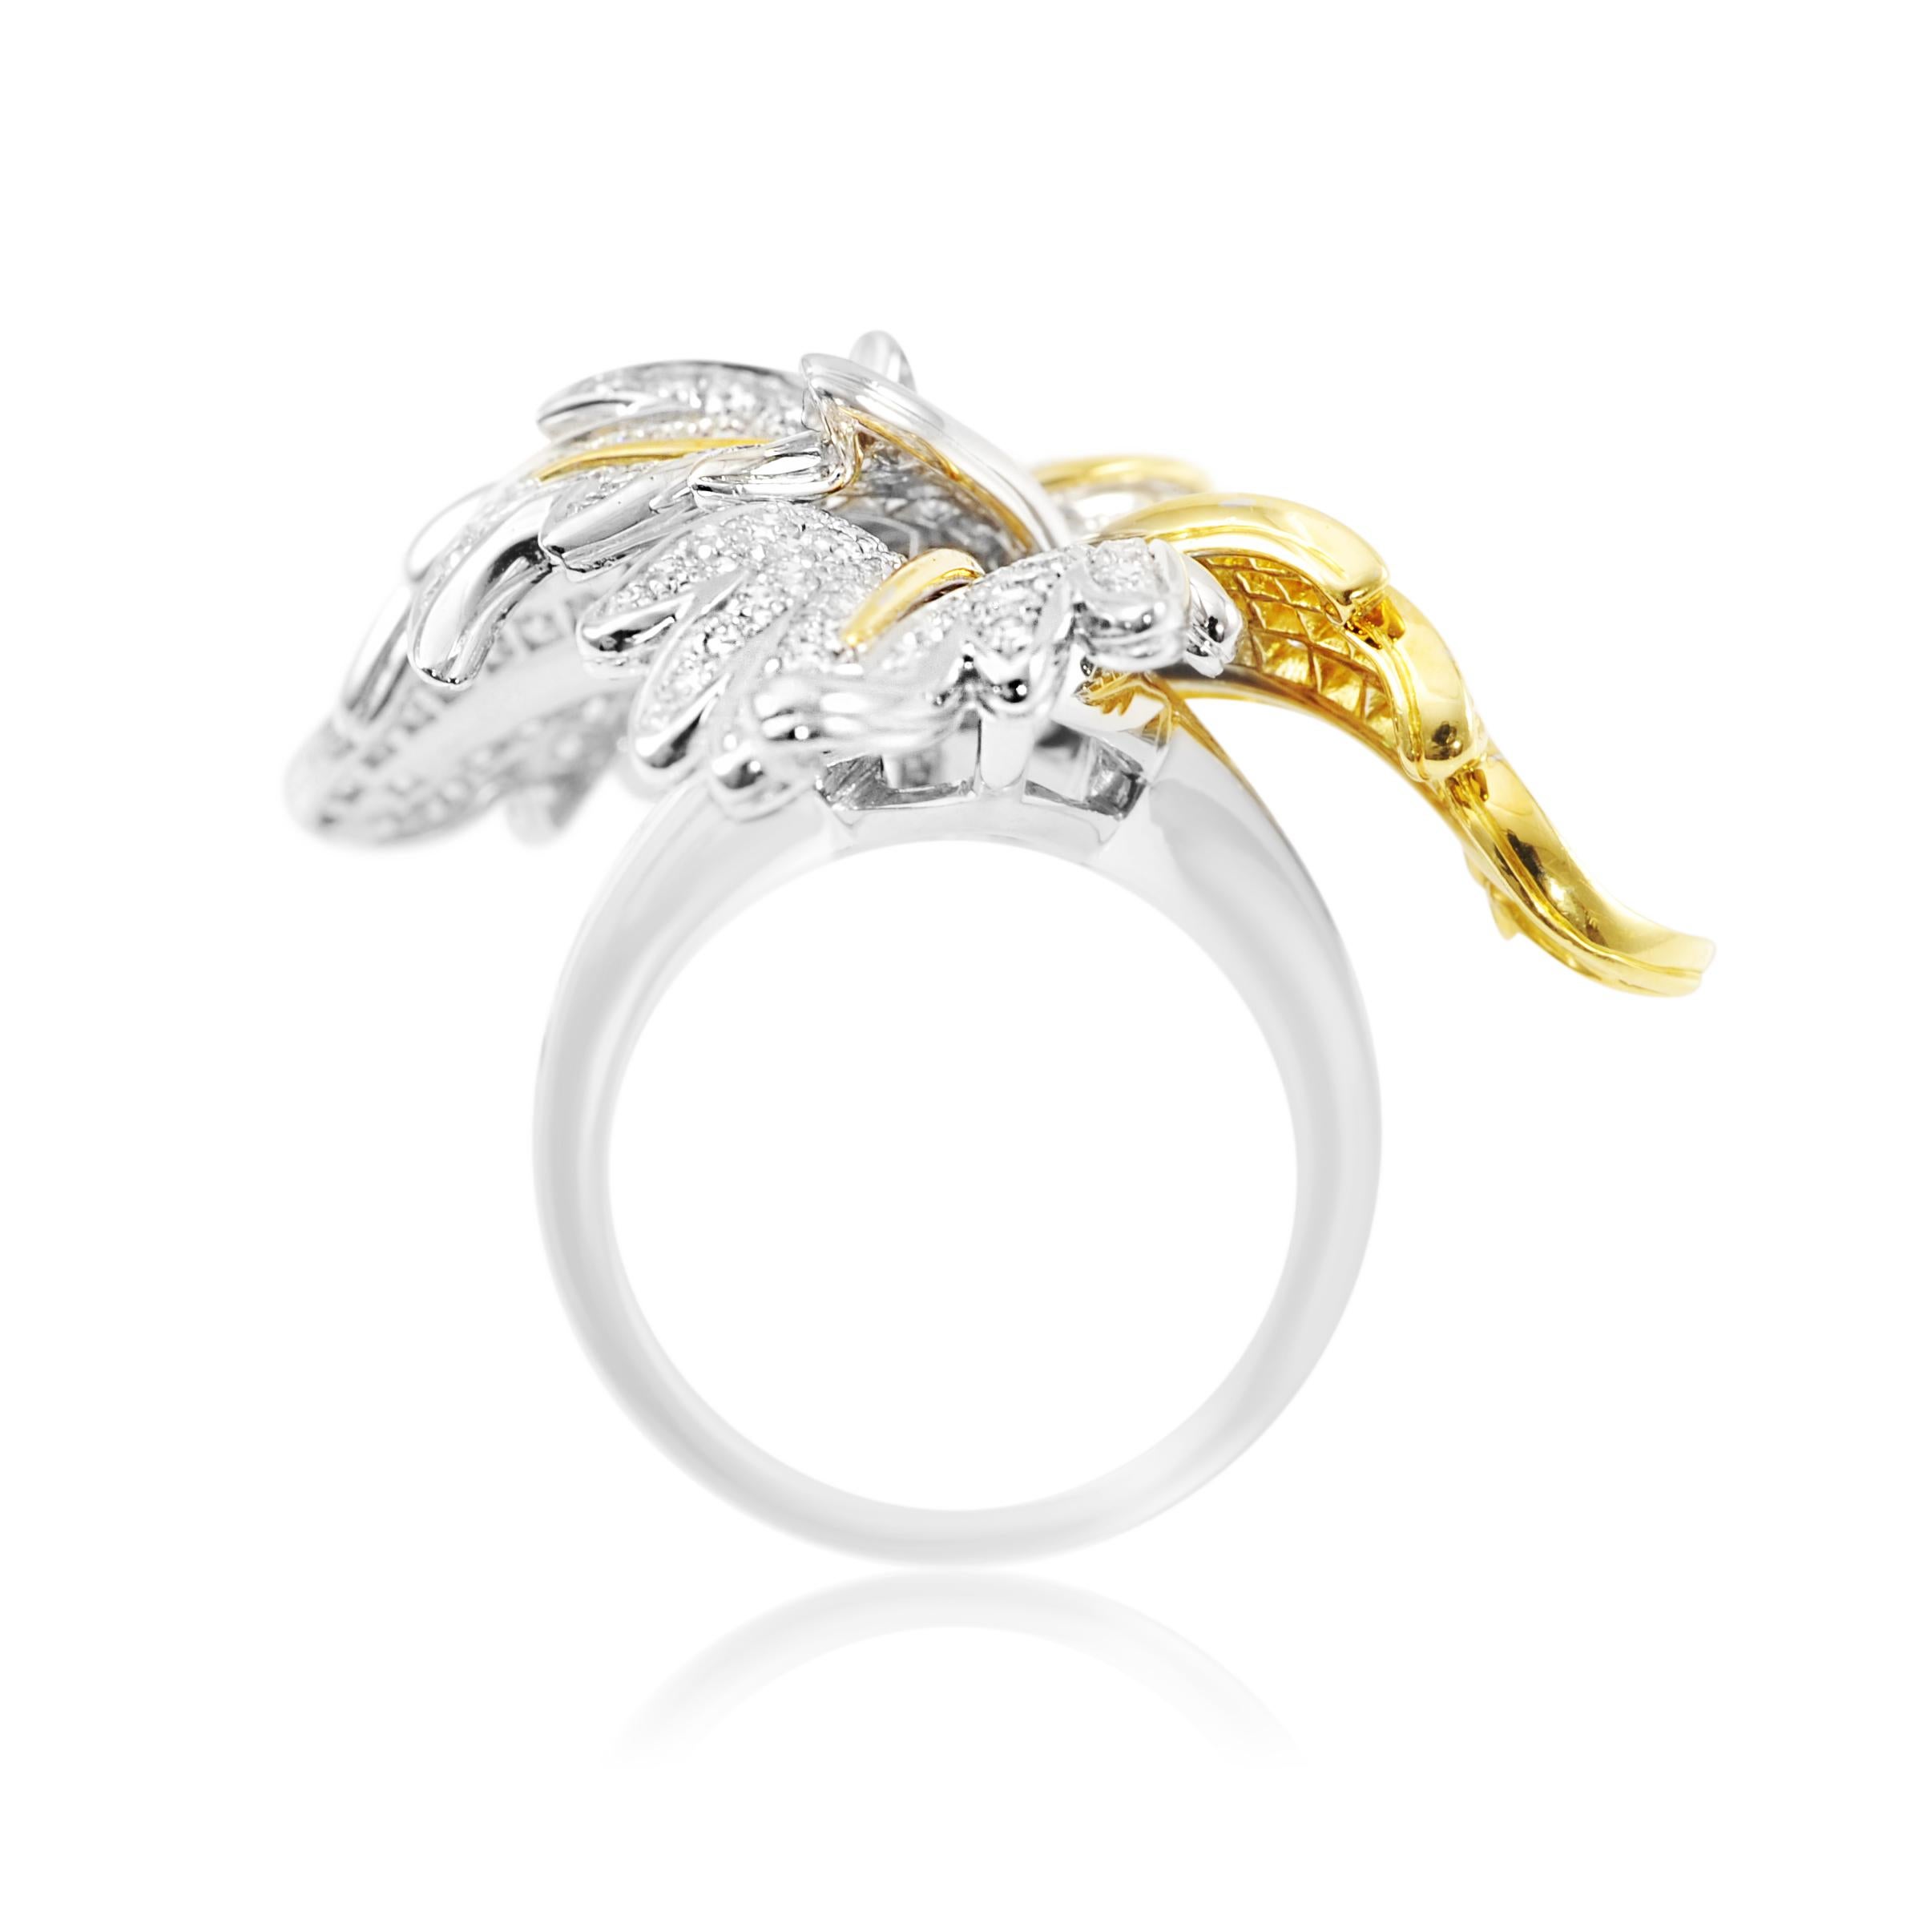 Contemporary Picchiotti 18 Karat White and Yellow Round Diamond Cocktail Ring For Sale